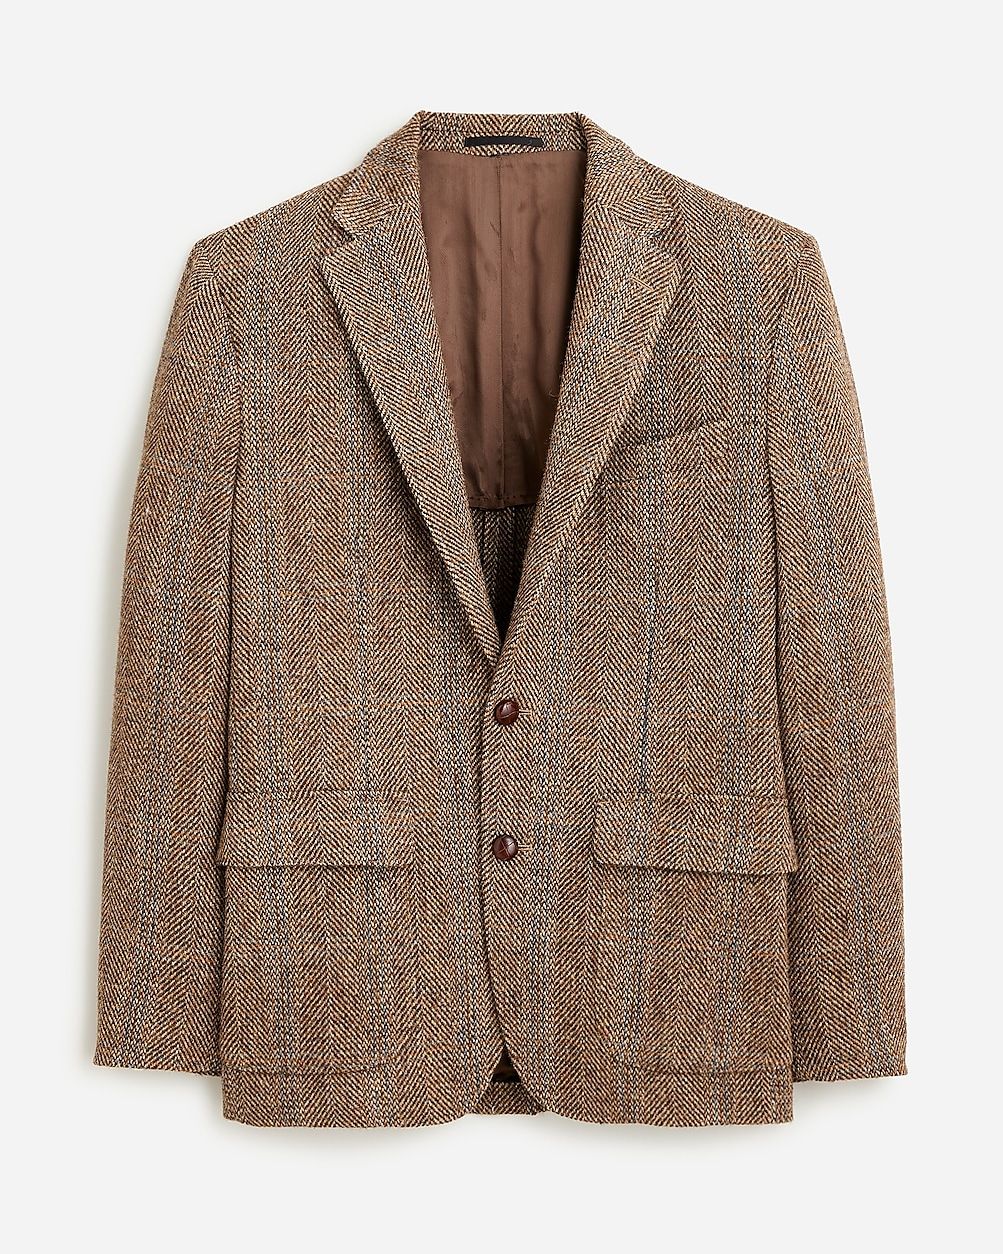 Limited-edition Crosby Classic-fit blazer in Scottish wool | J.Crew US